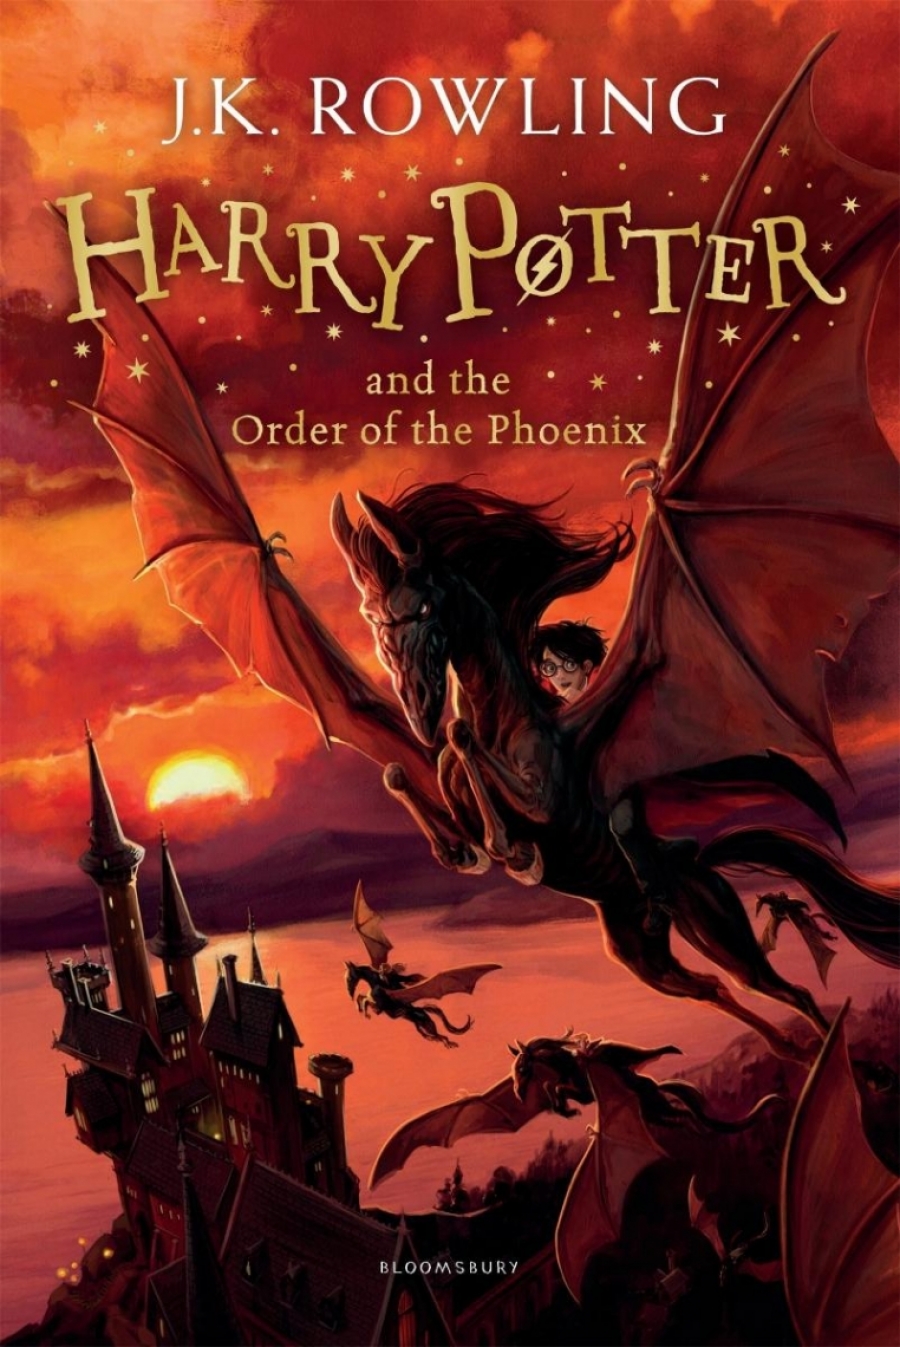 Rowling J.K. Harry Potter and the Order of the Phoenix HB 